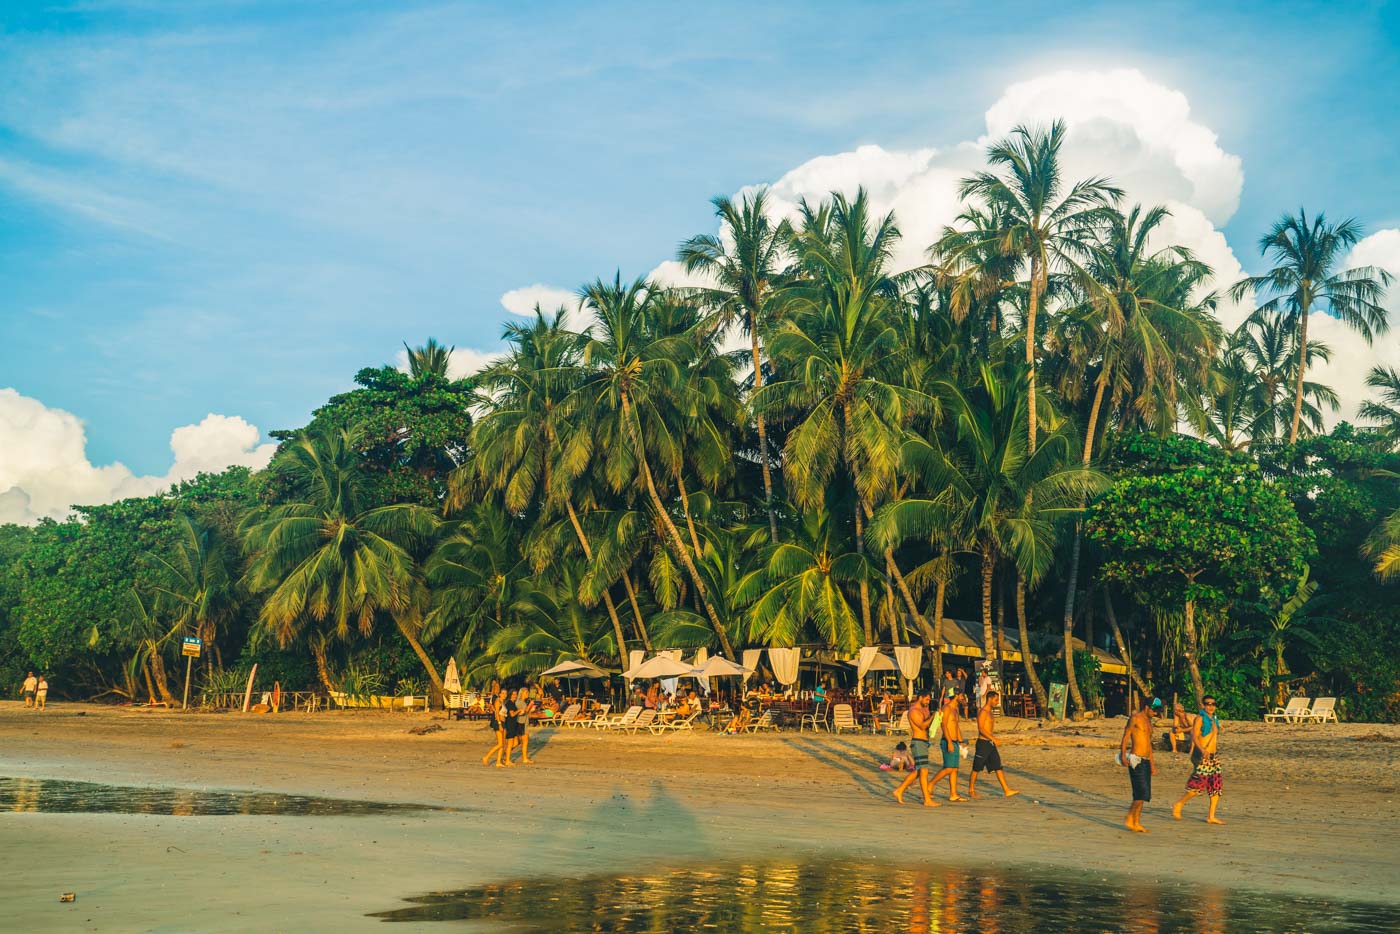 8 Best Hotels in Tamarindo, Costa Rica for the Eco-Conscious Traveler